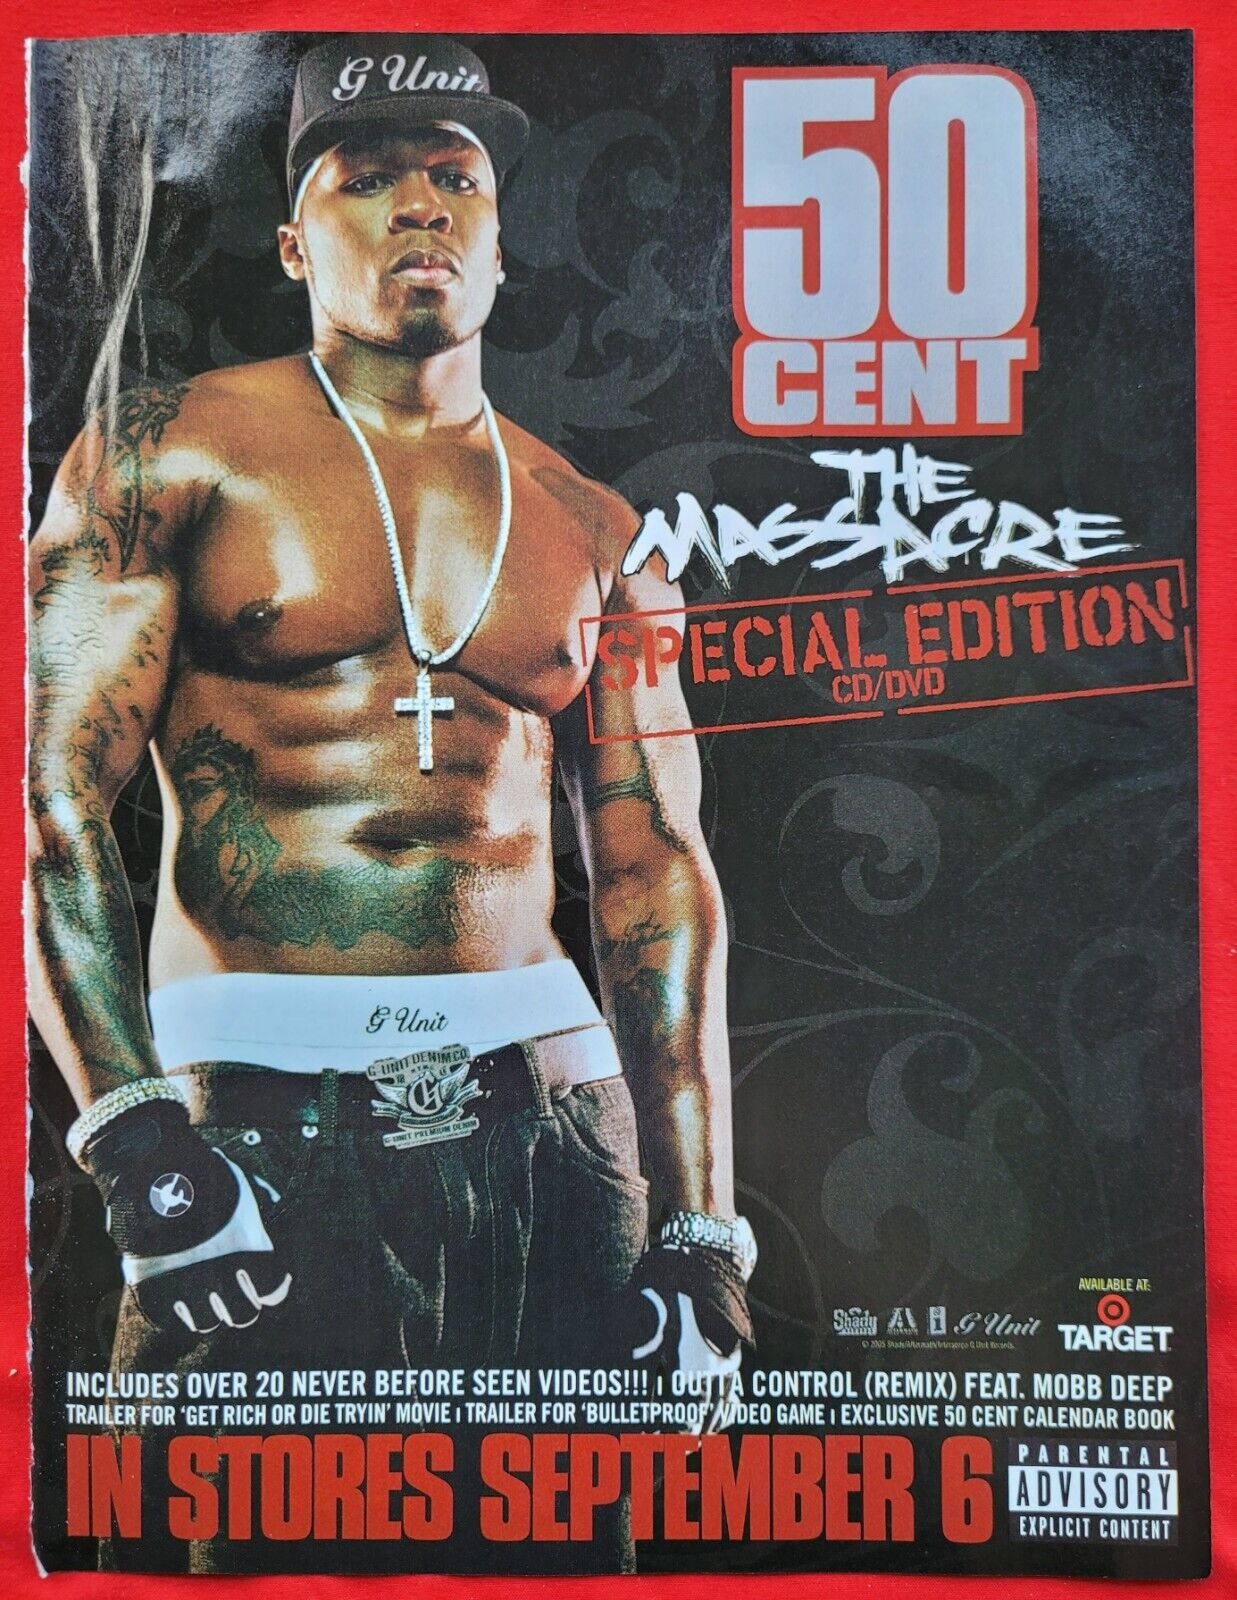 RARE 50 CENT The Massacre Special Edition CD/DVD - TARGET Promo PRINT AD 